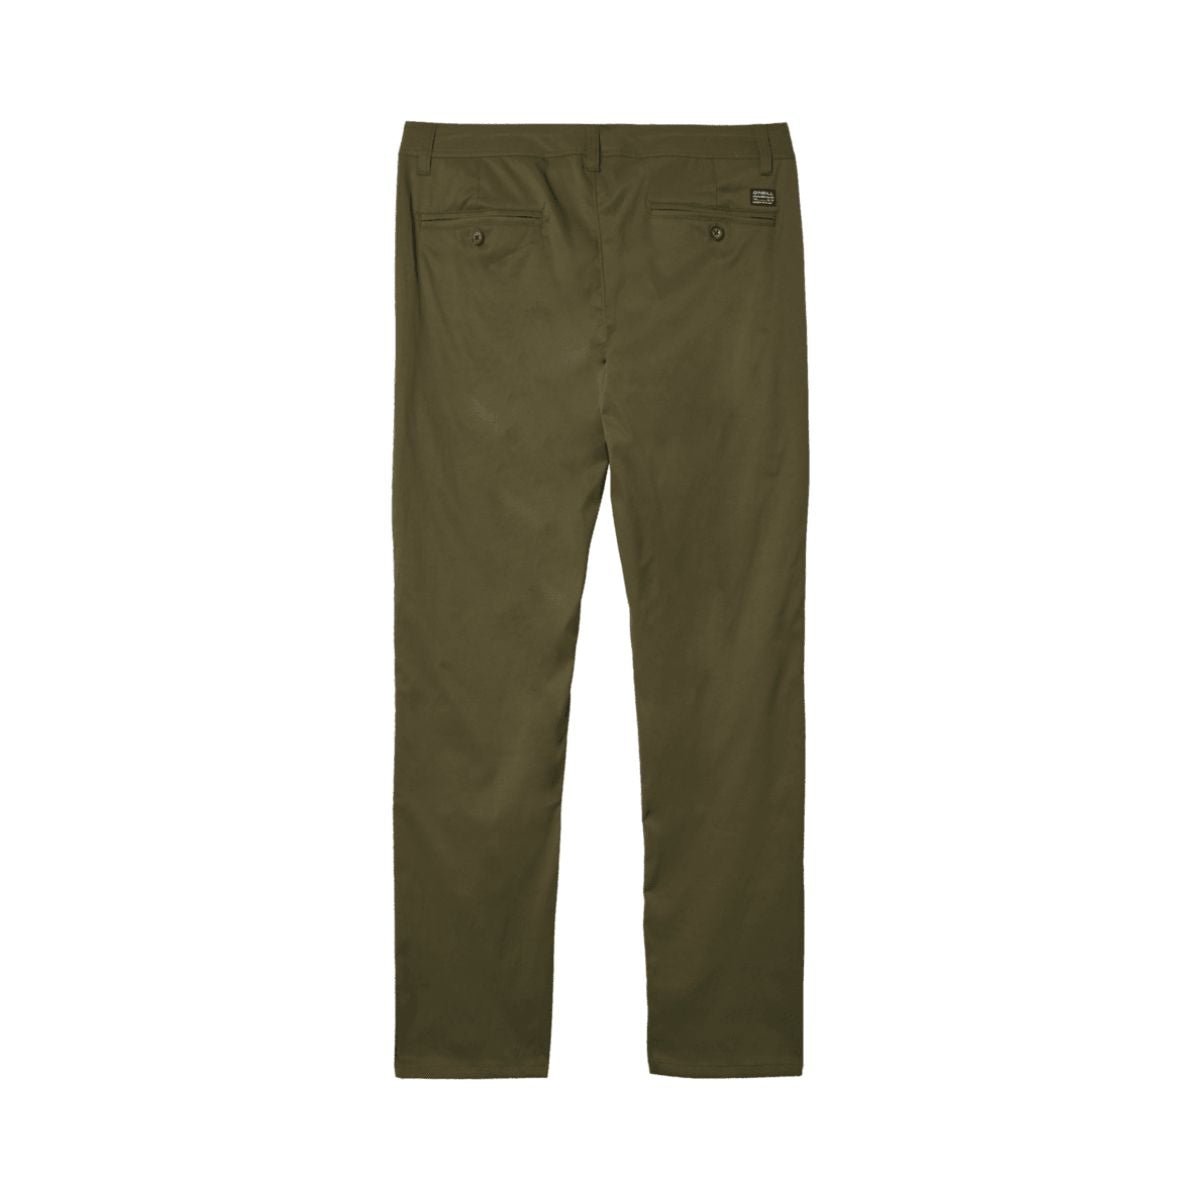 O'Neill Mission Hybrid Chino Pants in Army - BoardCo